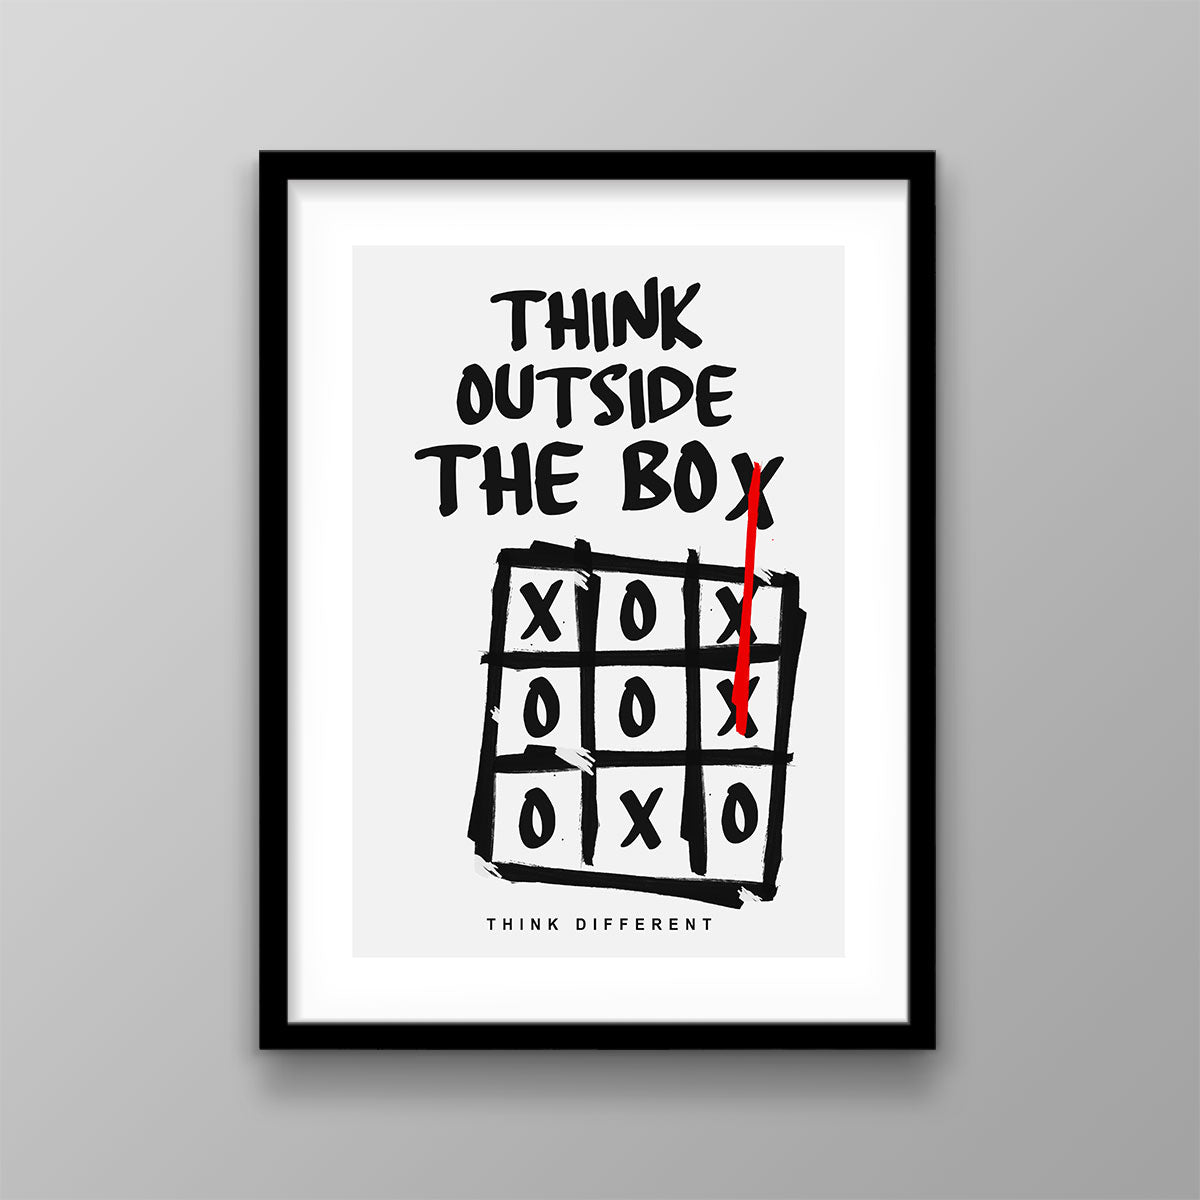 Think Outside The Box - Success Hunters Prints